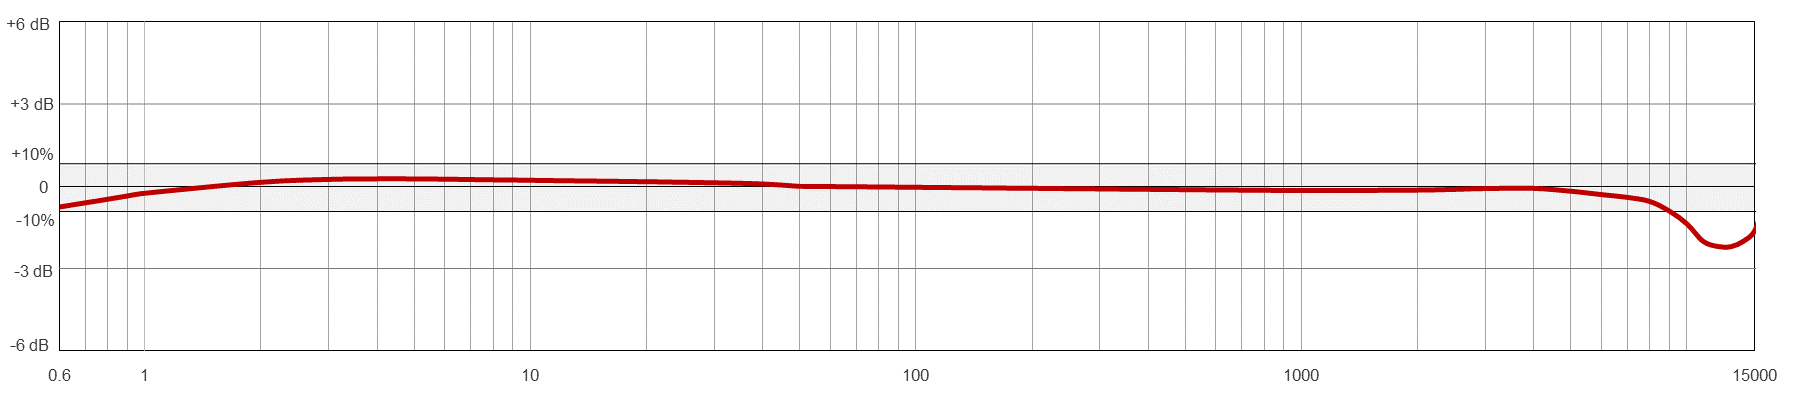 A line graph showing the frequency resopnse of a CTC AC940 condition monitoring sensor.